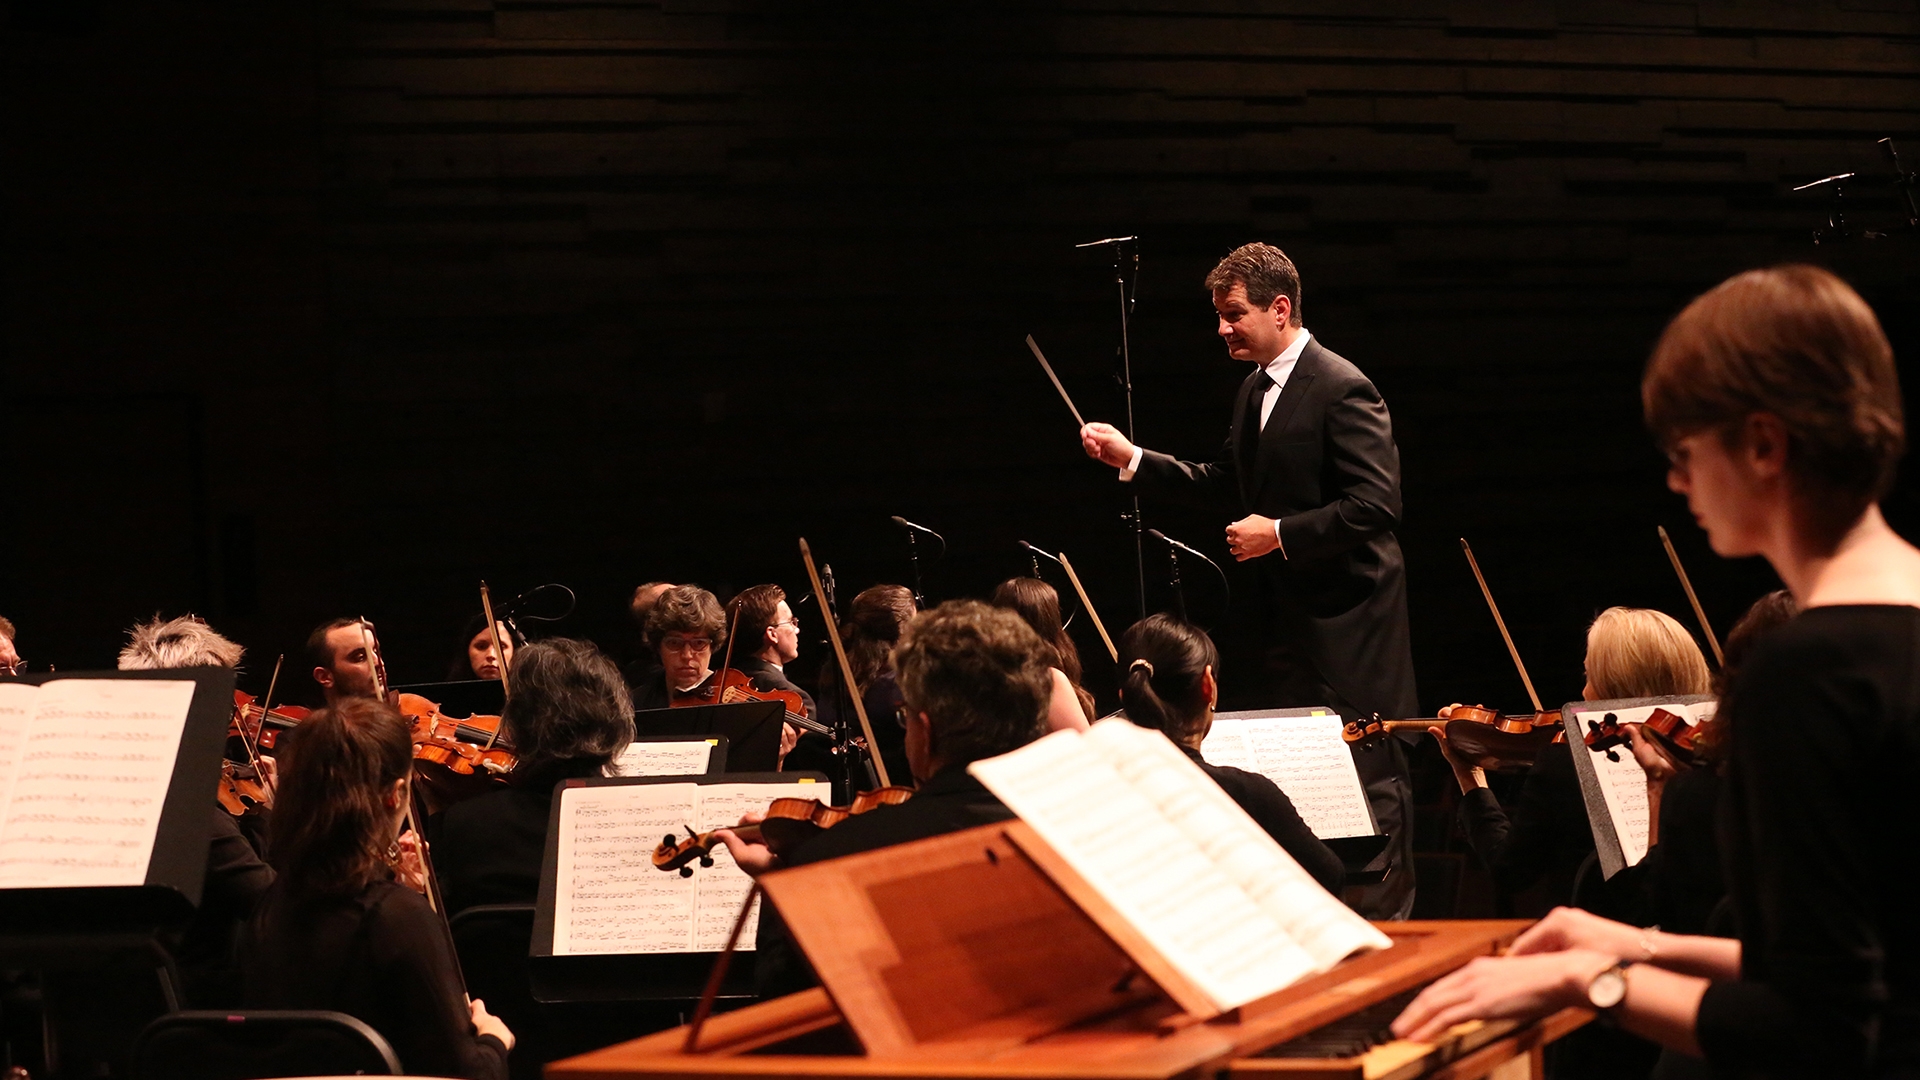 Conductor standing over orchestra